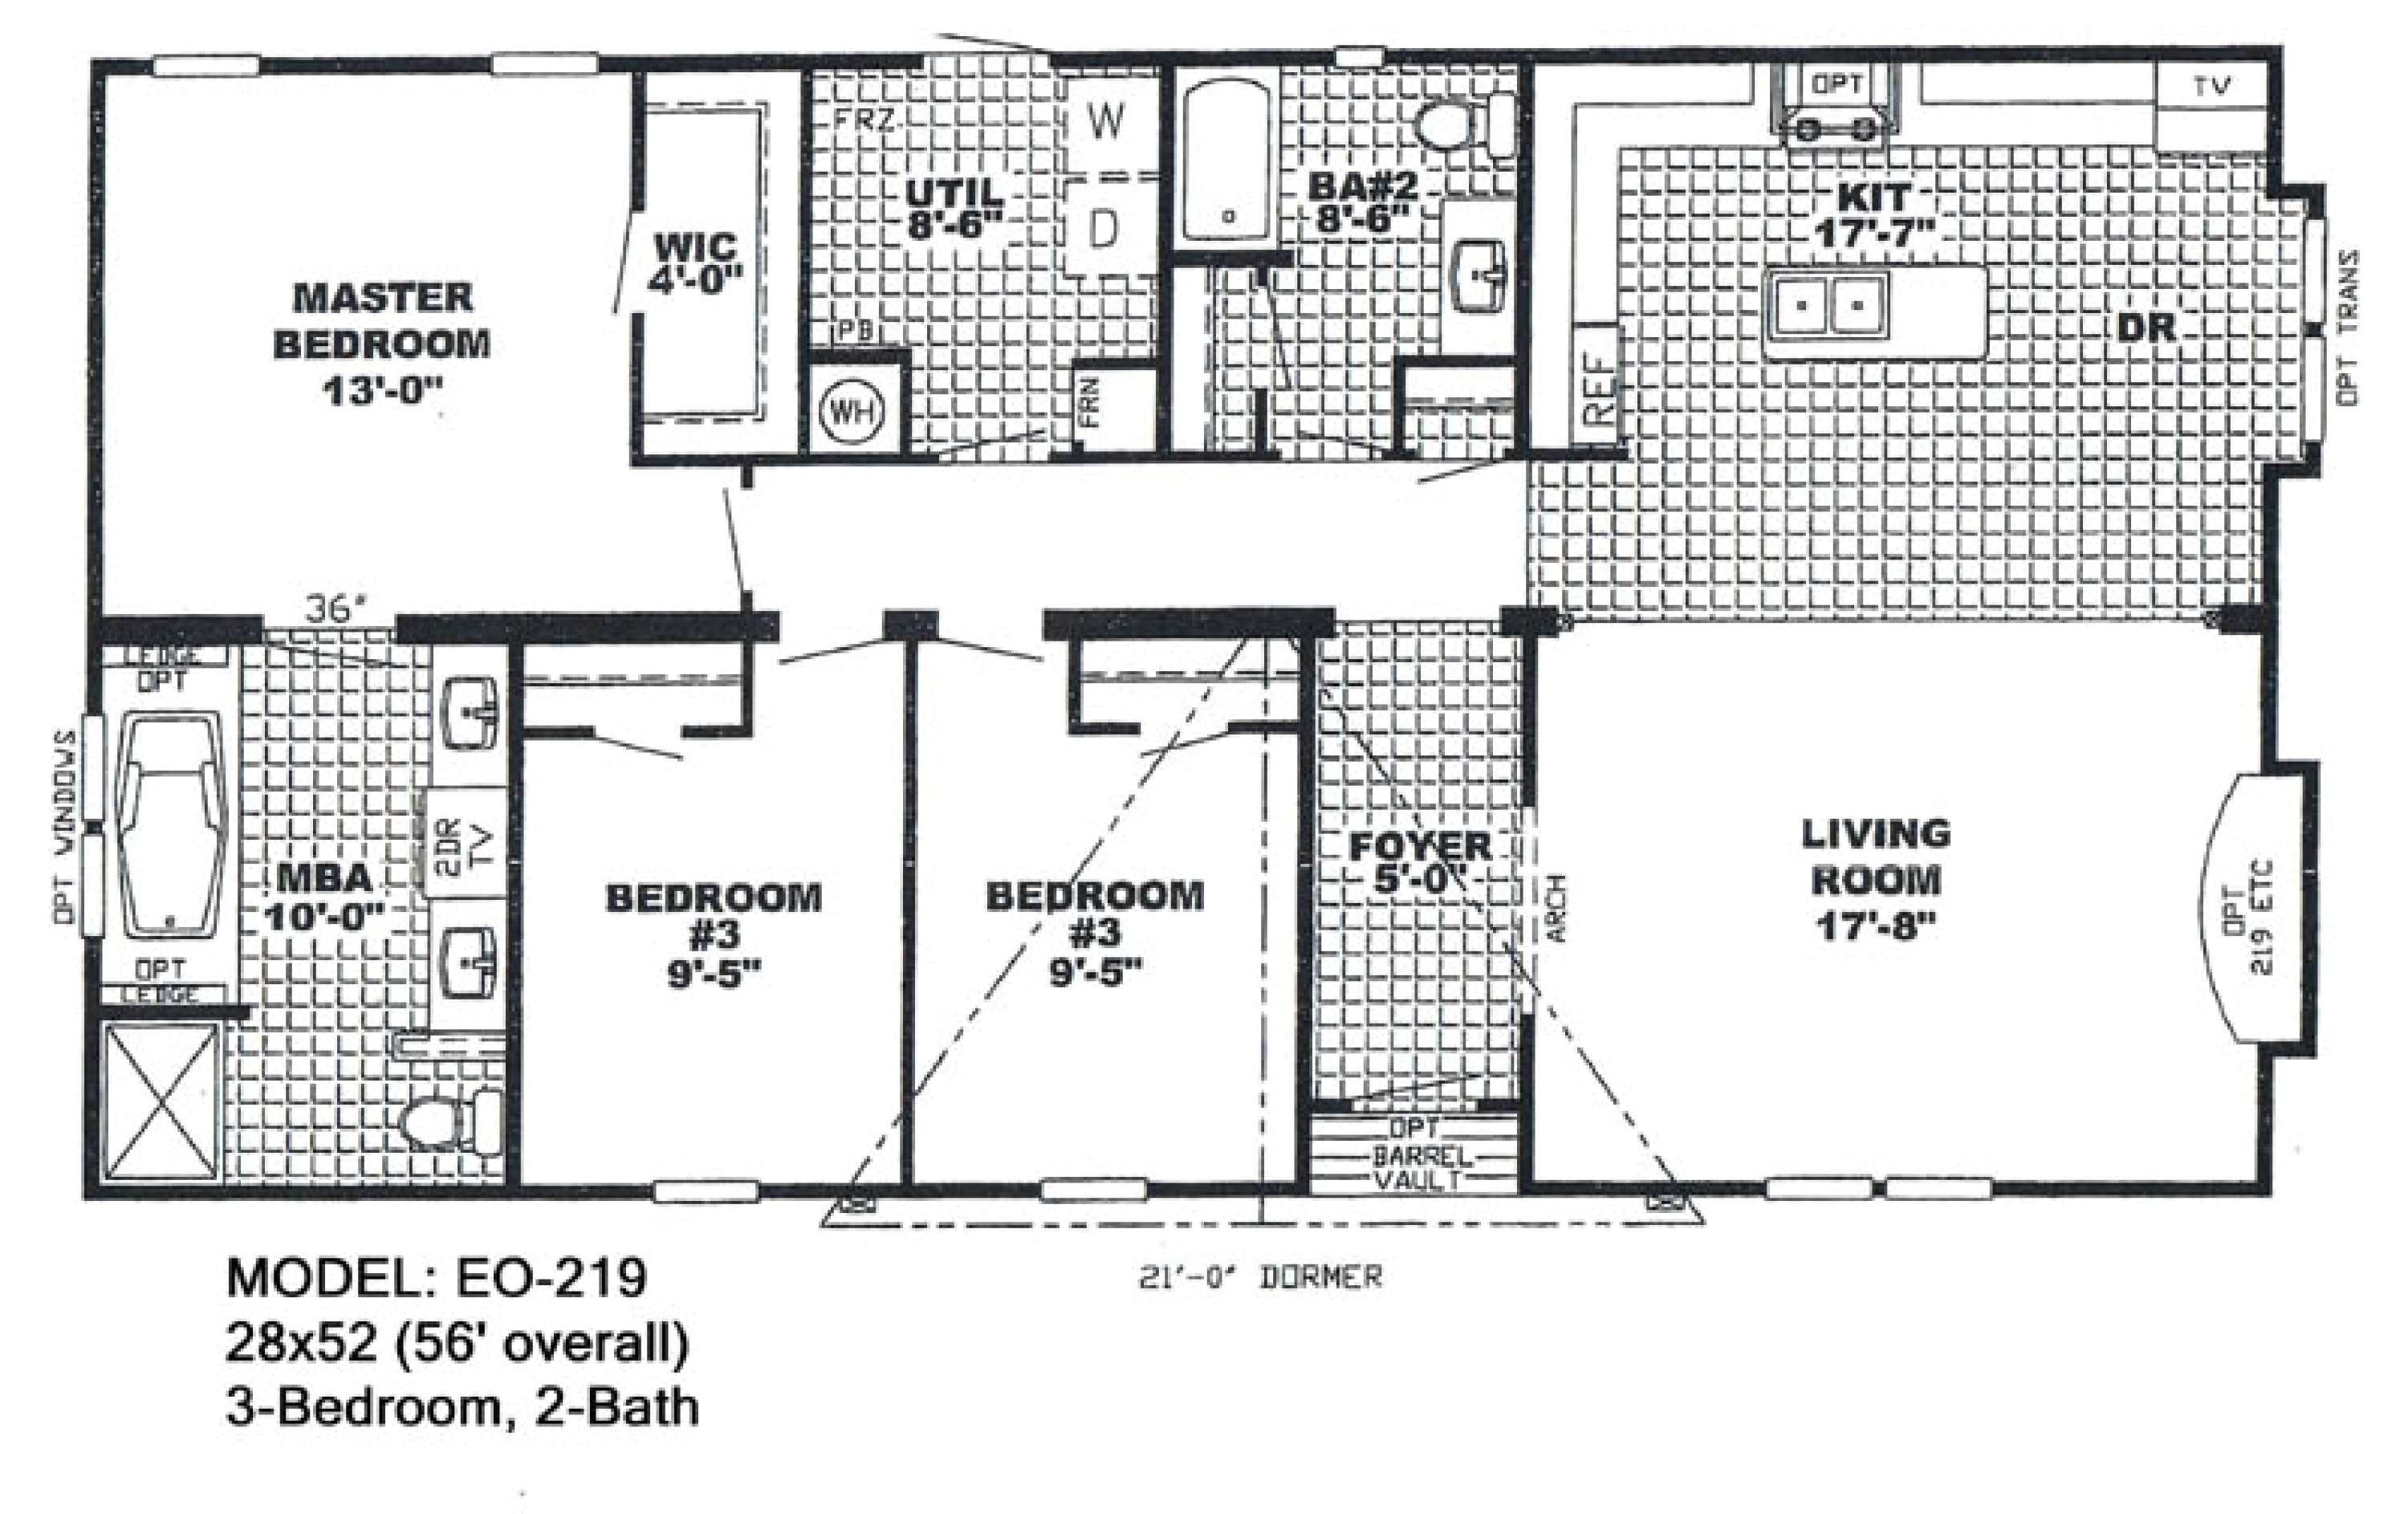 Mobile Home Floor Plans Double Wide Double Wide Mobile Home Floor Plans Also 4 Bedroom